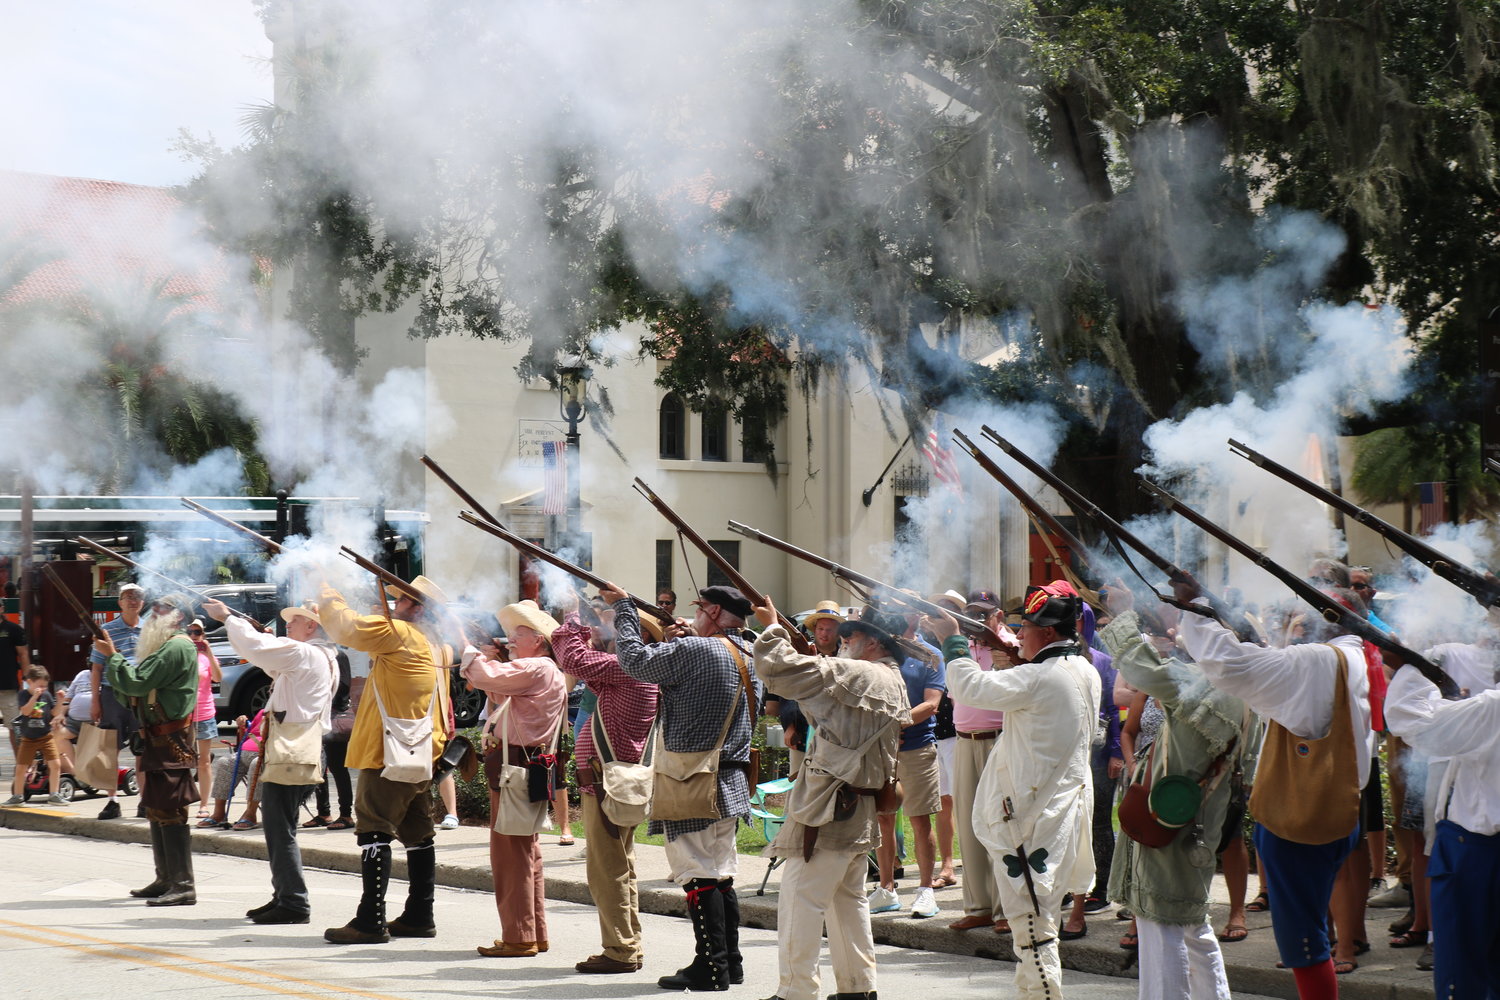 Reenactors fire muskets following the signing of the Adams-Onis treaty.